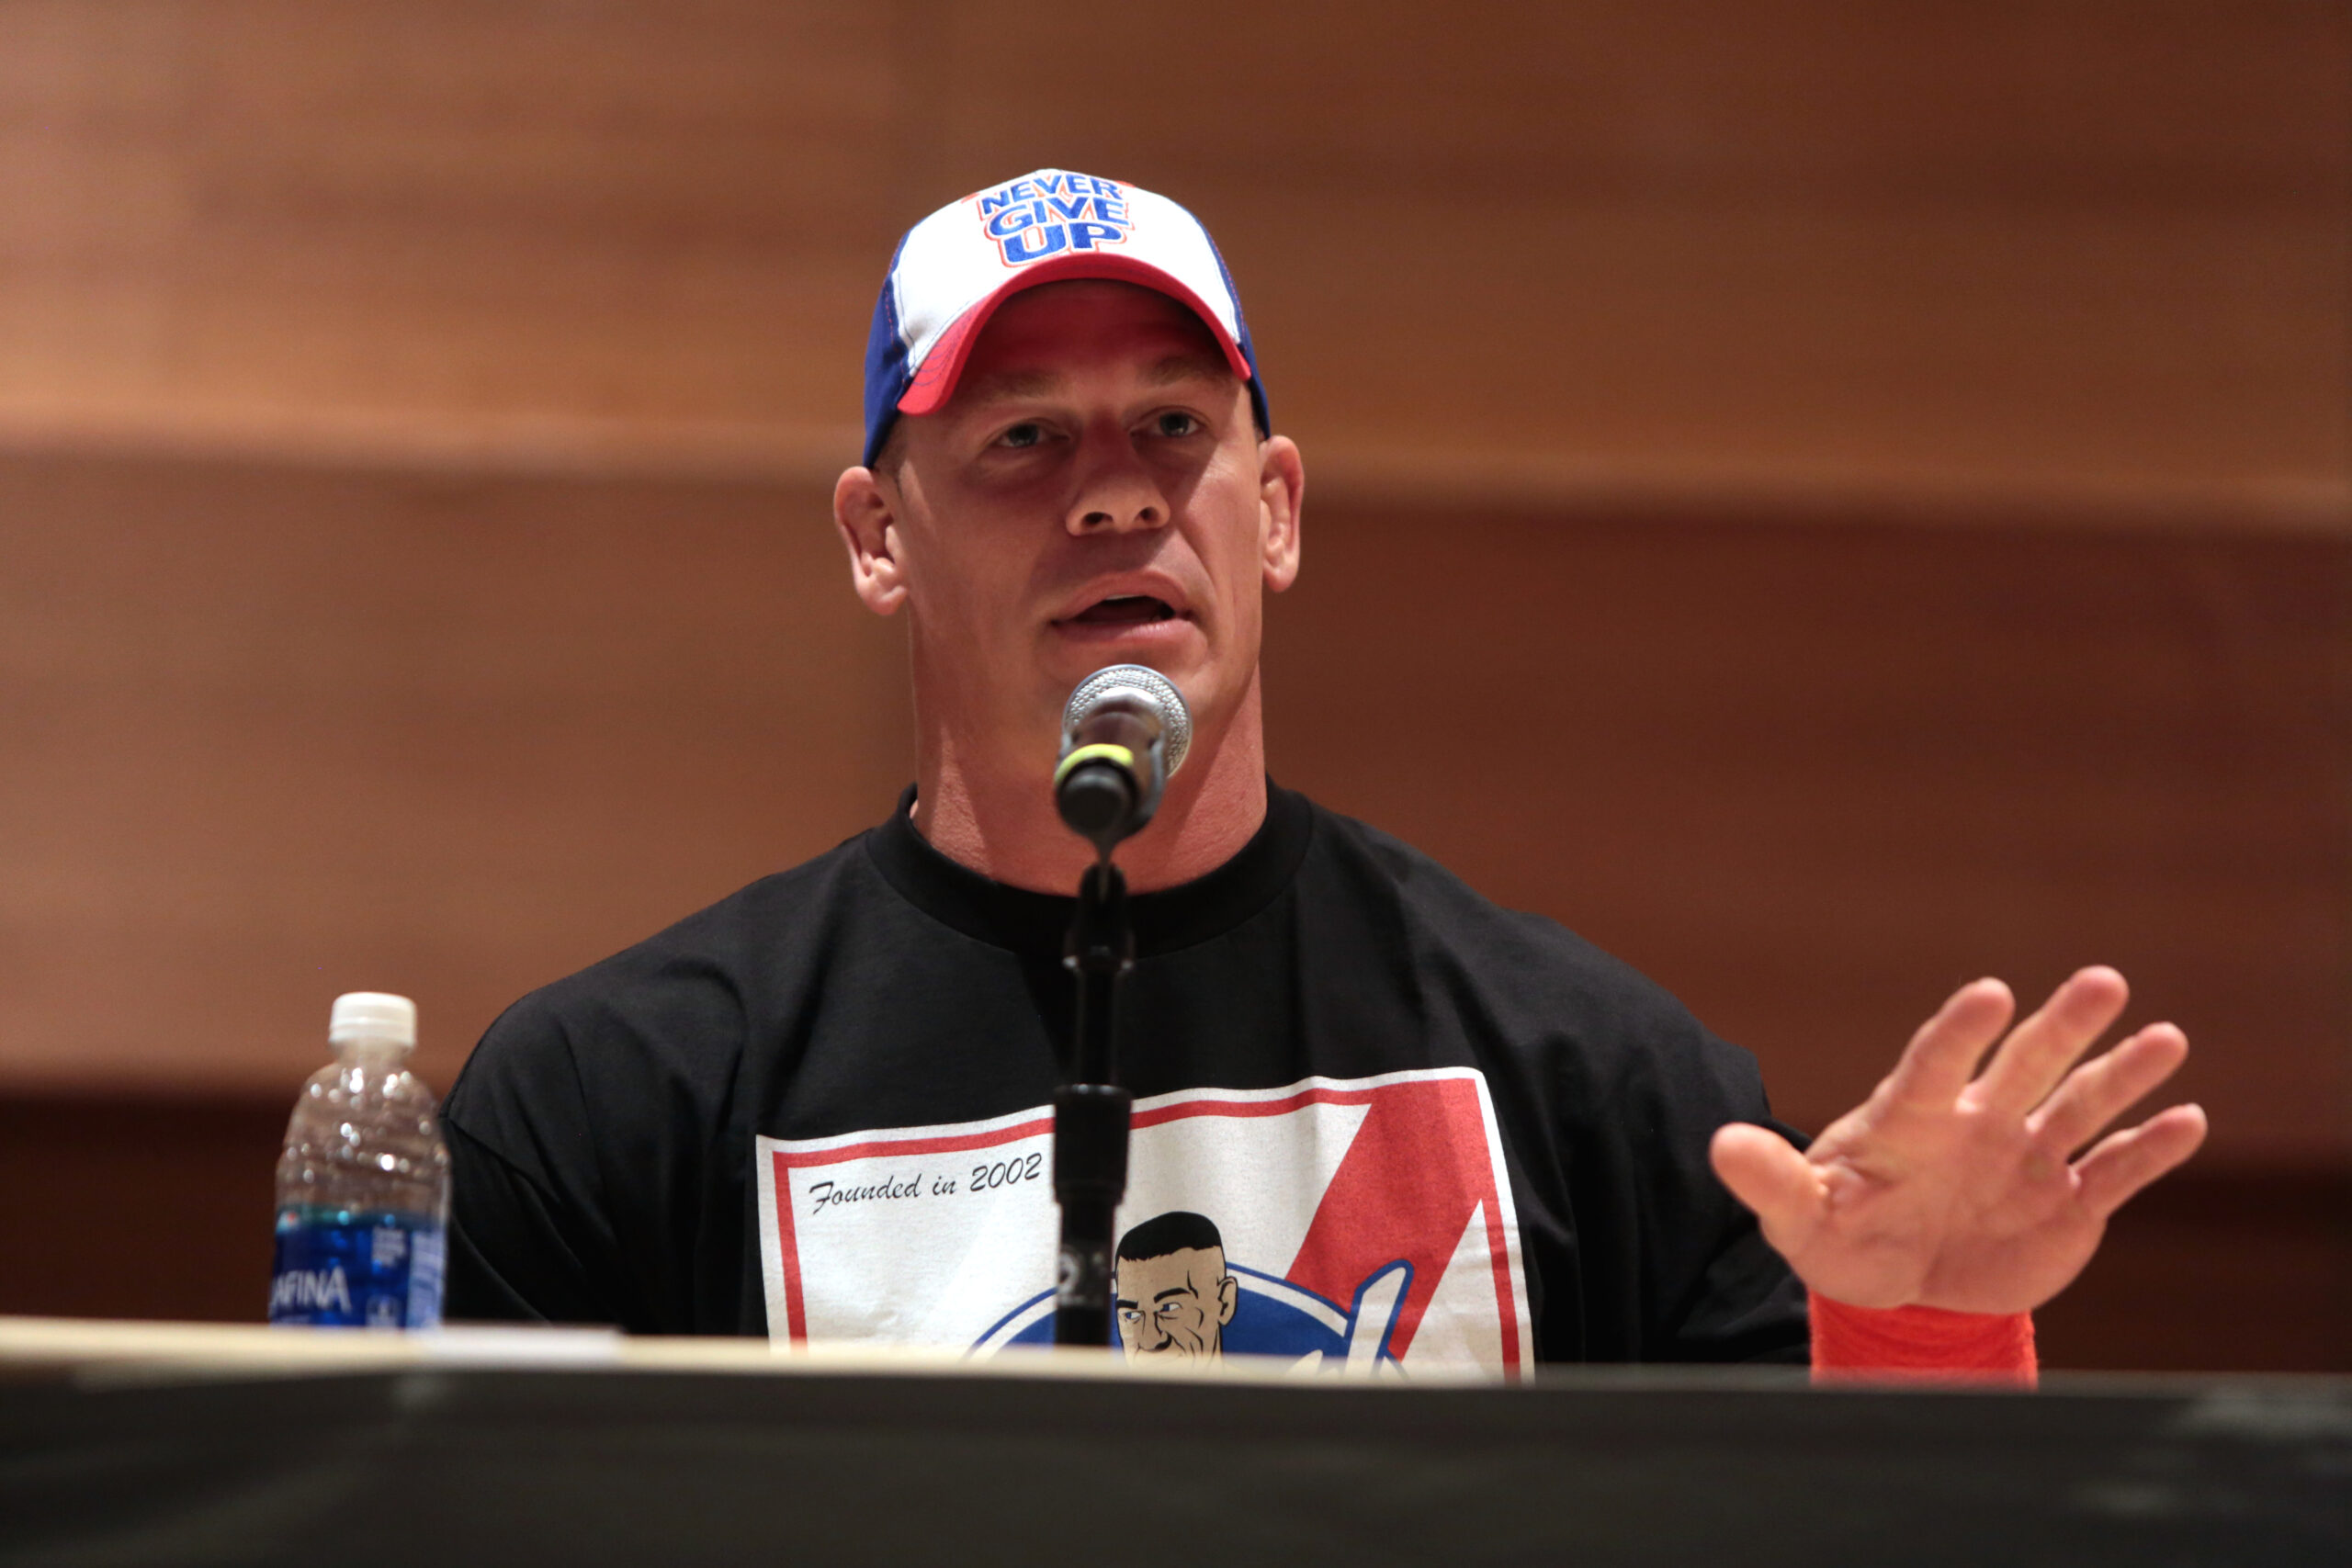 Picture of John Cena [Gage Skidmore from Peoria, AZ, United States of America, CC BY-SA 2.0 , via Wikimedia Commons]